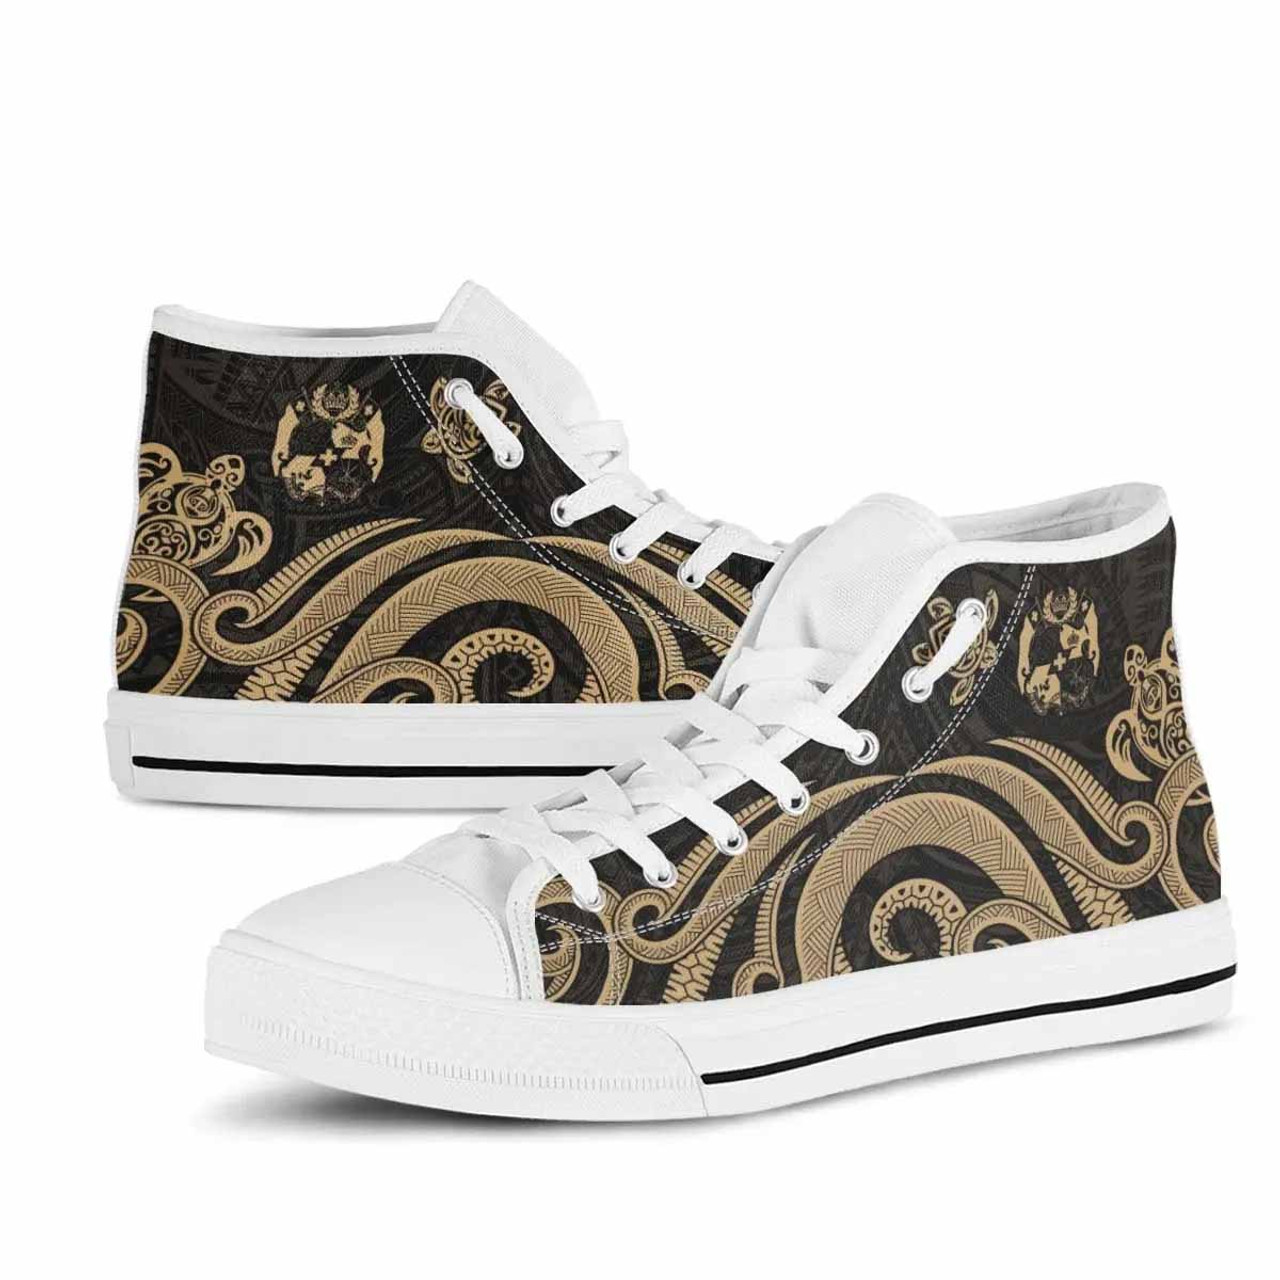 Tonga High Top Shoes - Gold Tentacle Turtle 10